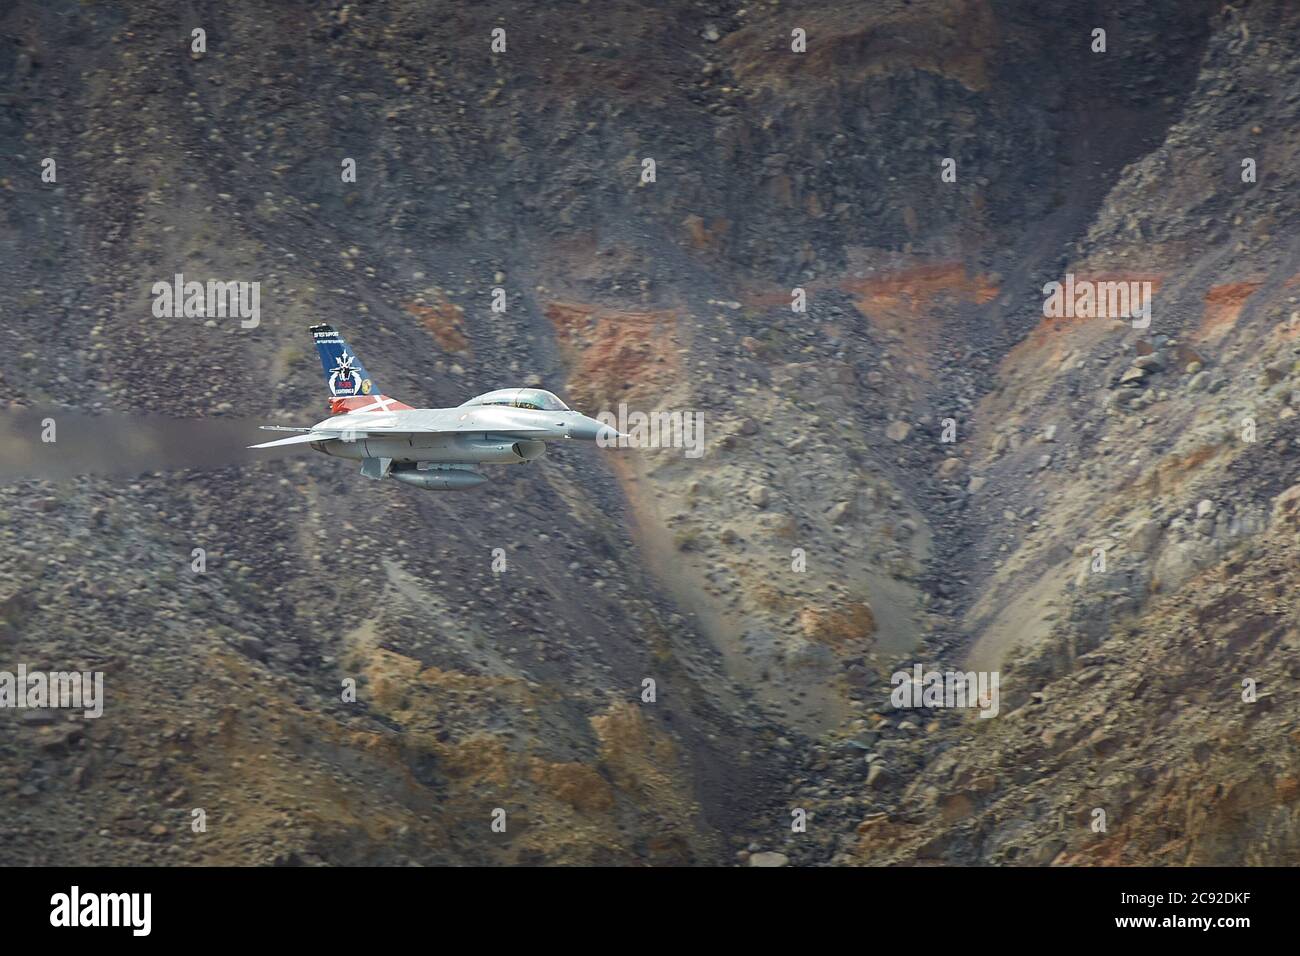 Royal Danish Air Force F-16 Flying At Low Level And High Speed Though Rainbow Canyon, California, USA. Stock Photo